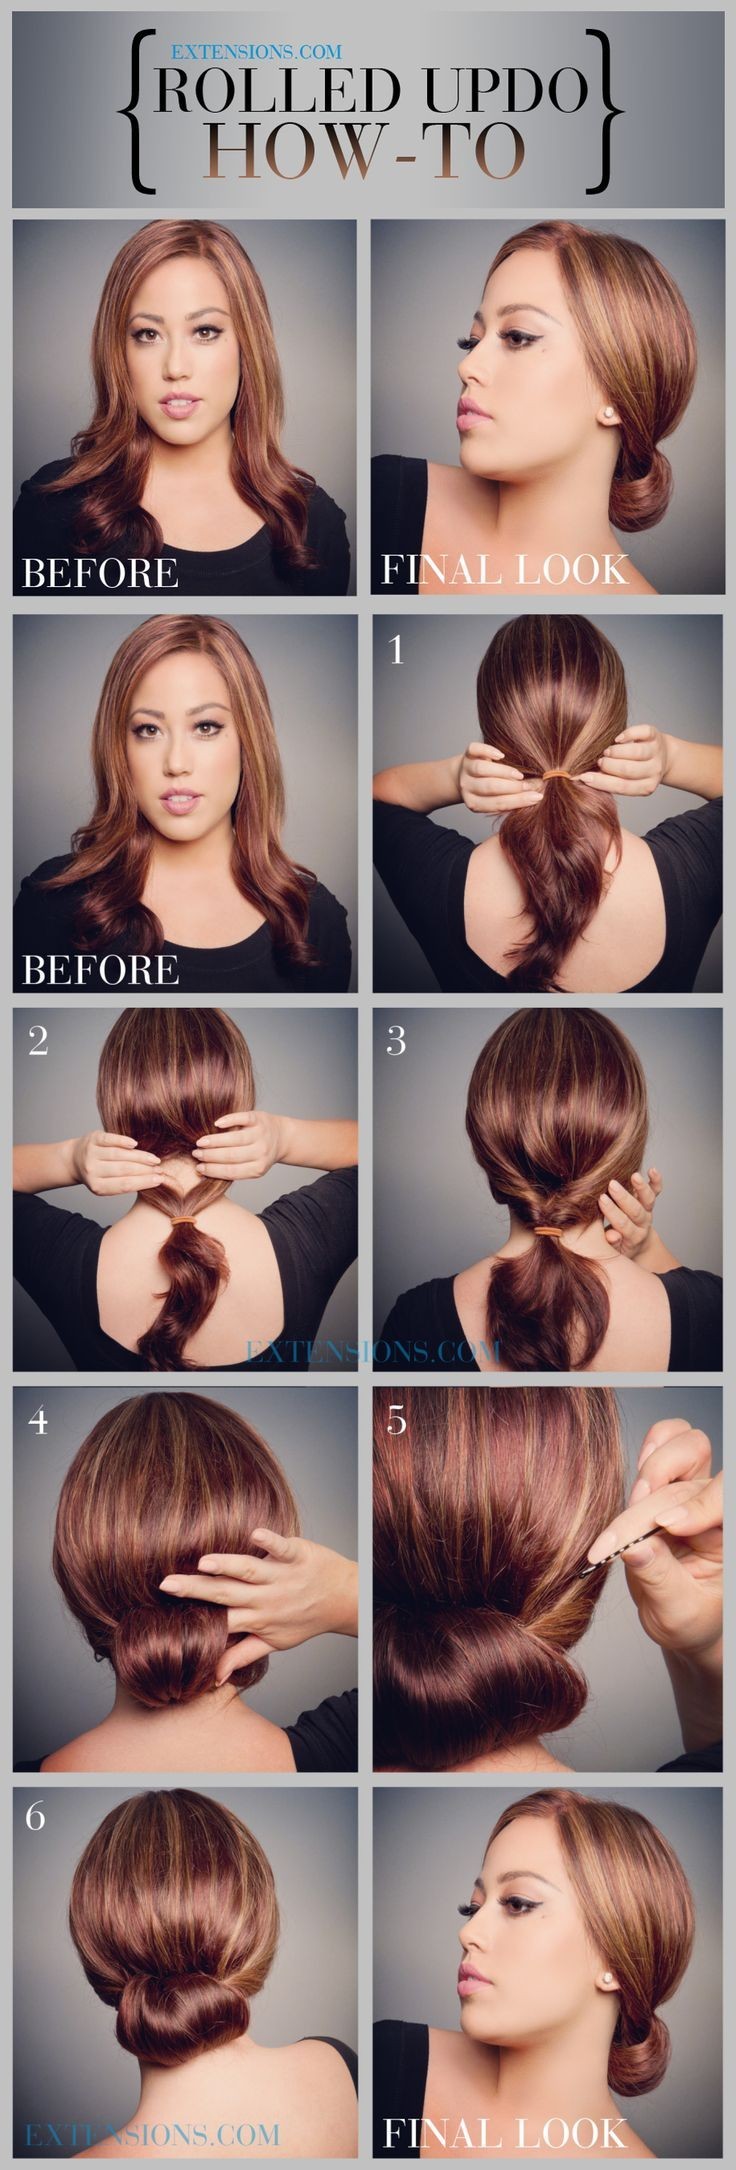 How To Make A Rolled Updo